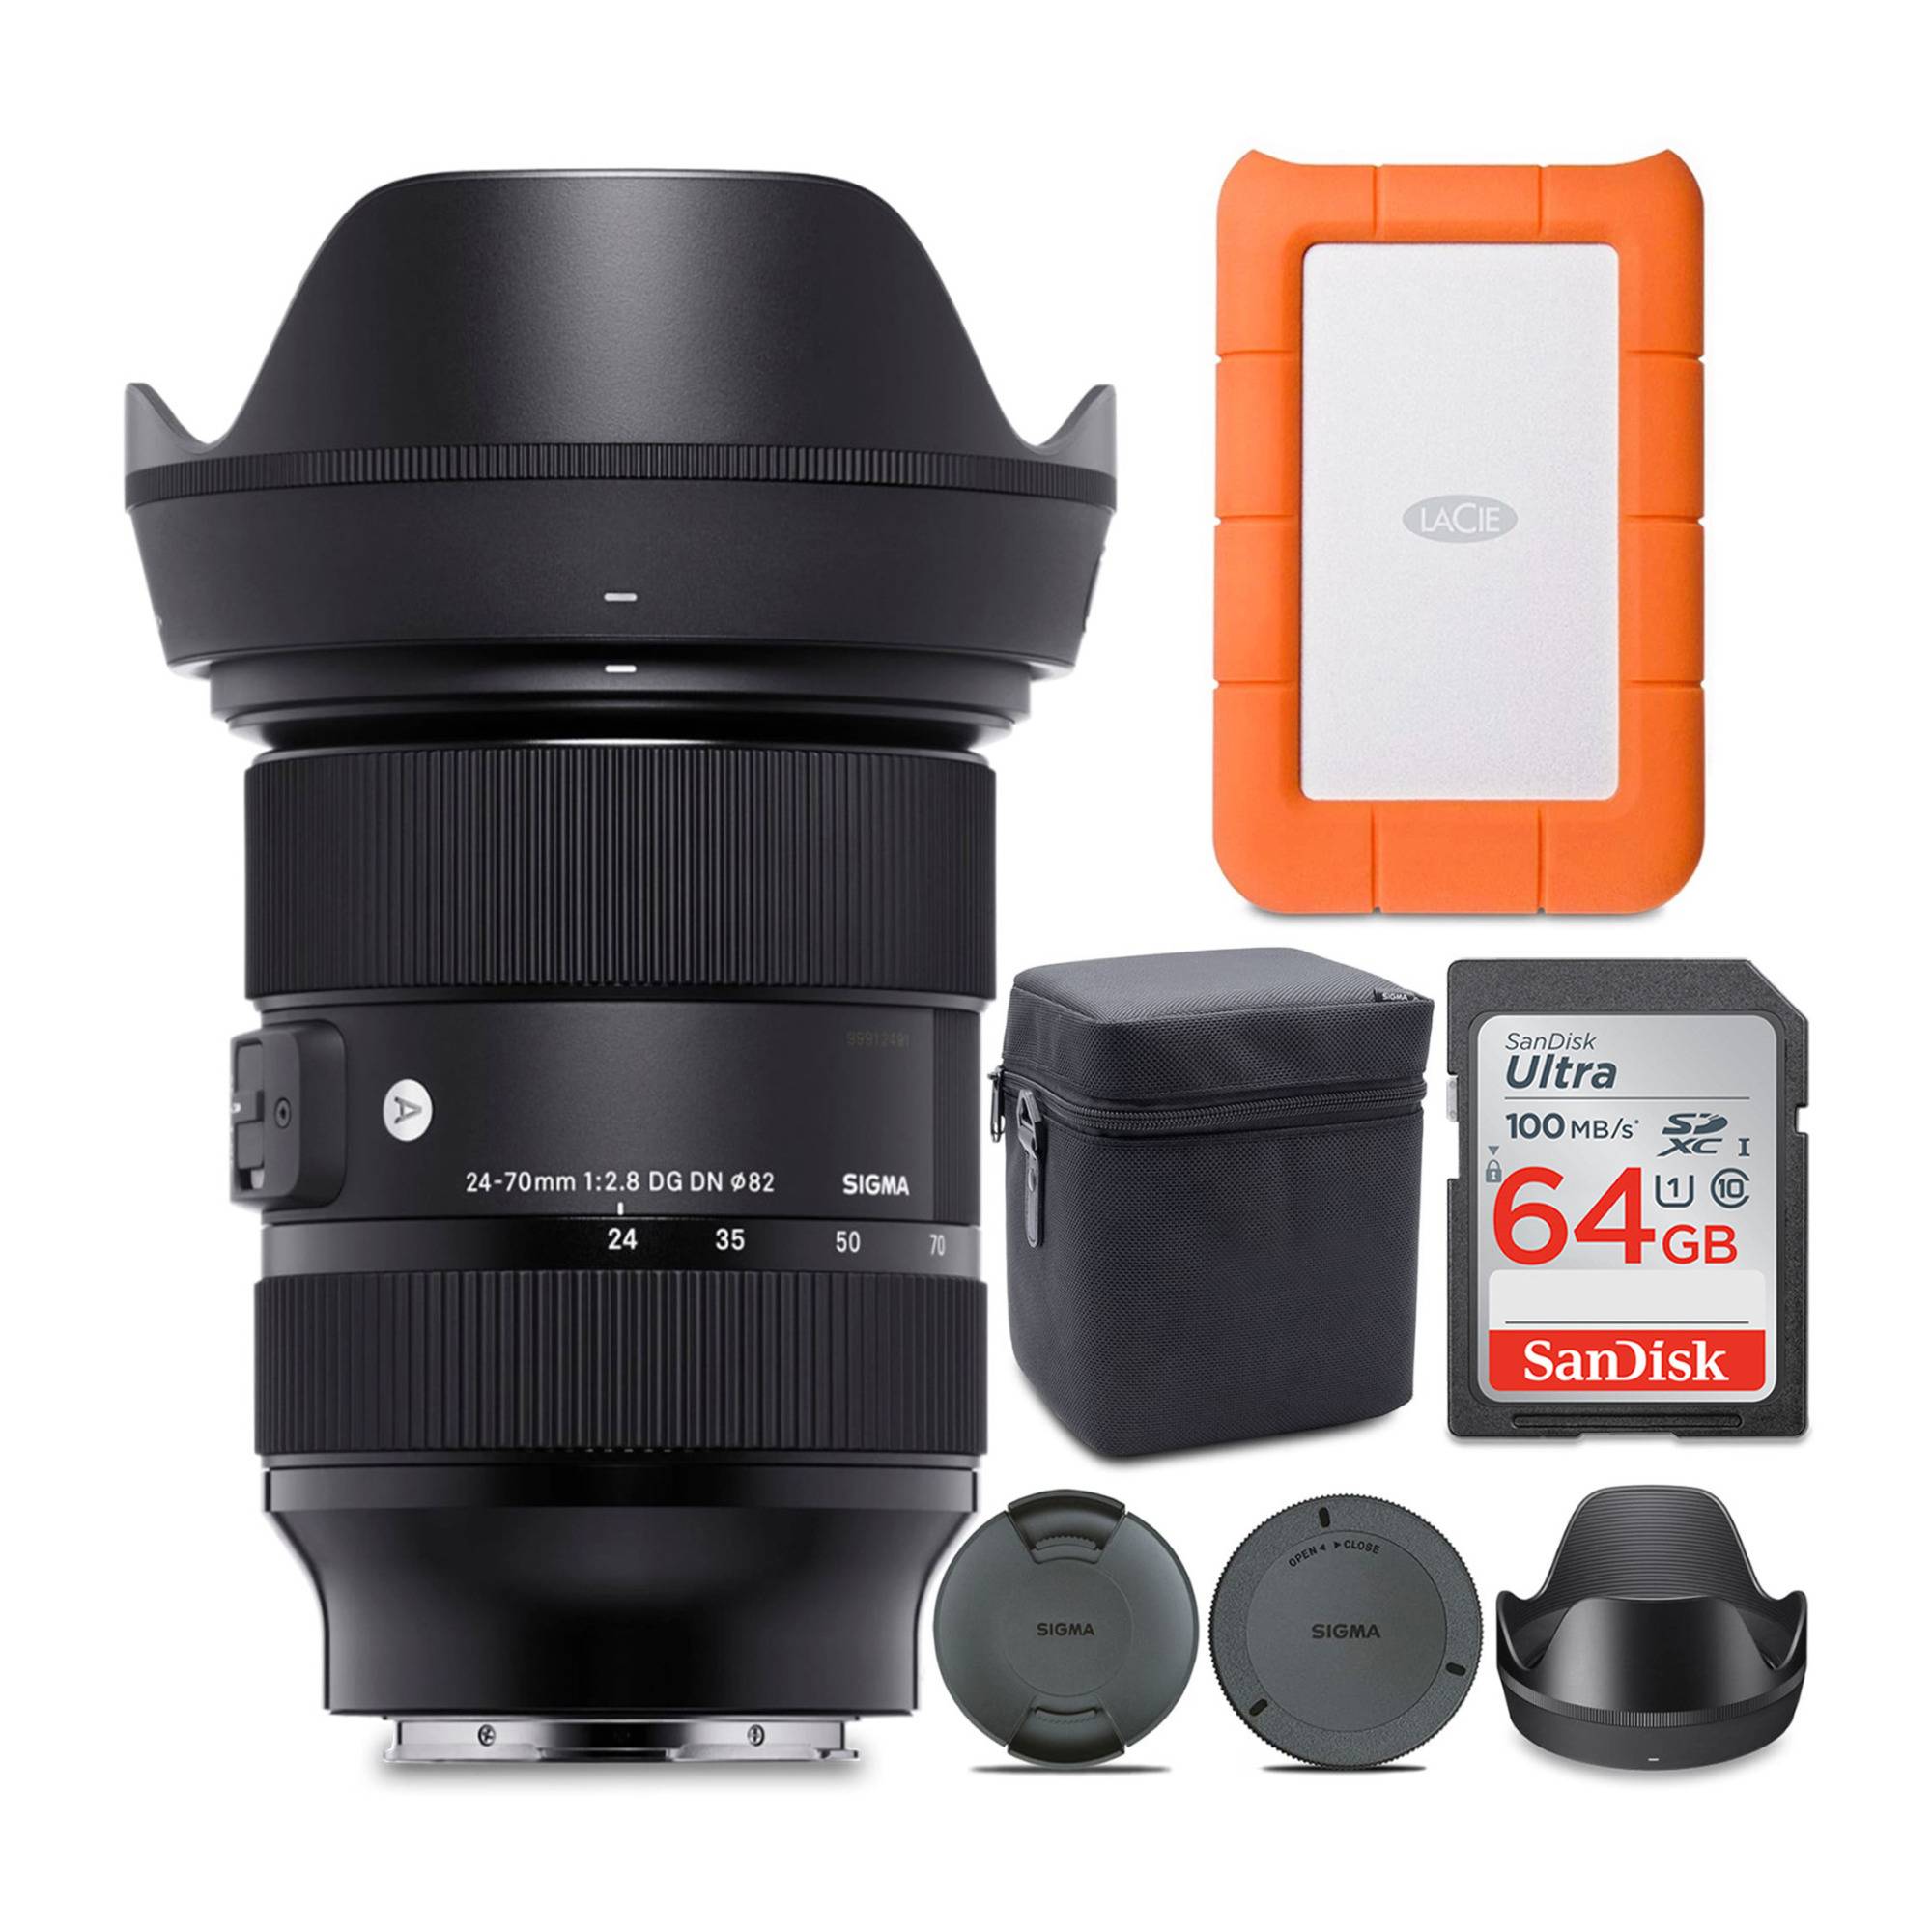 Sigma 24-70mm f/2.8 DG DN Lens for Sony E-Mount with Memory Bundle